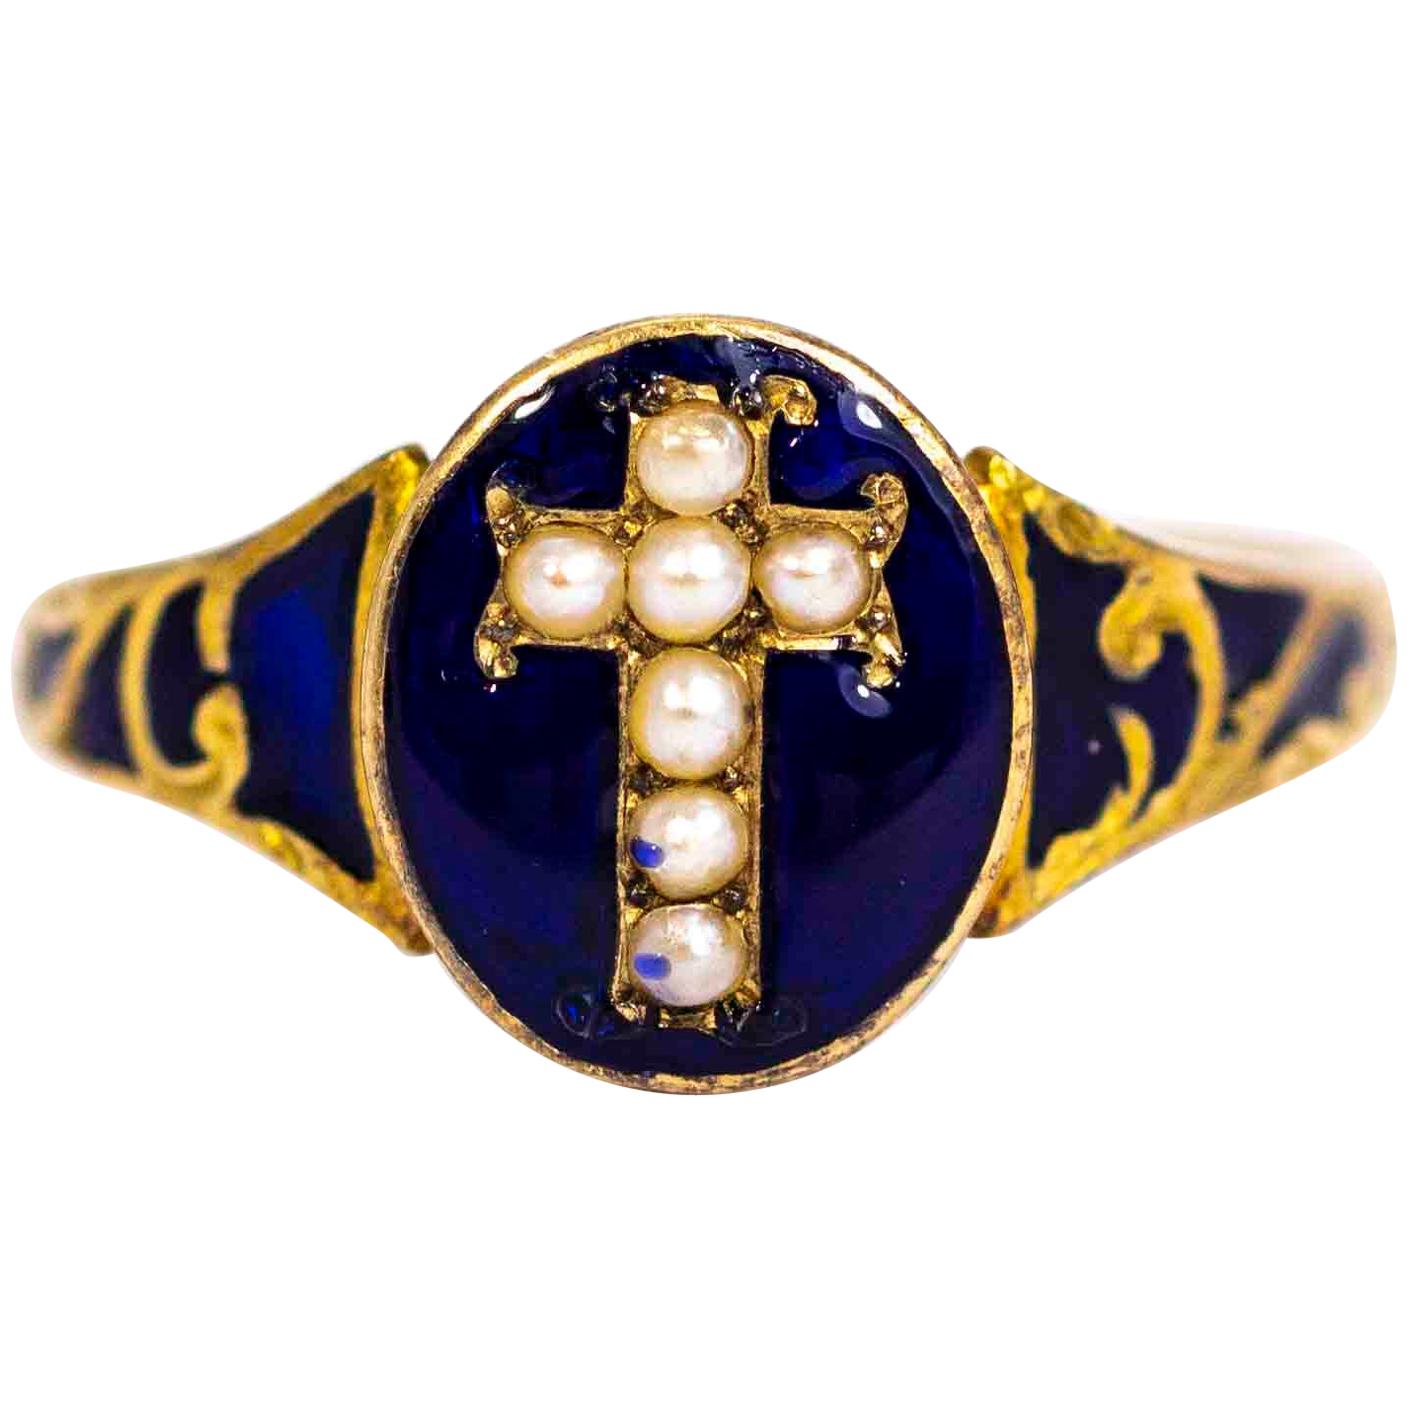 Victorian 18 Carat Gold Royal Blue Enamel and Pearl Cross Mourning Ring